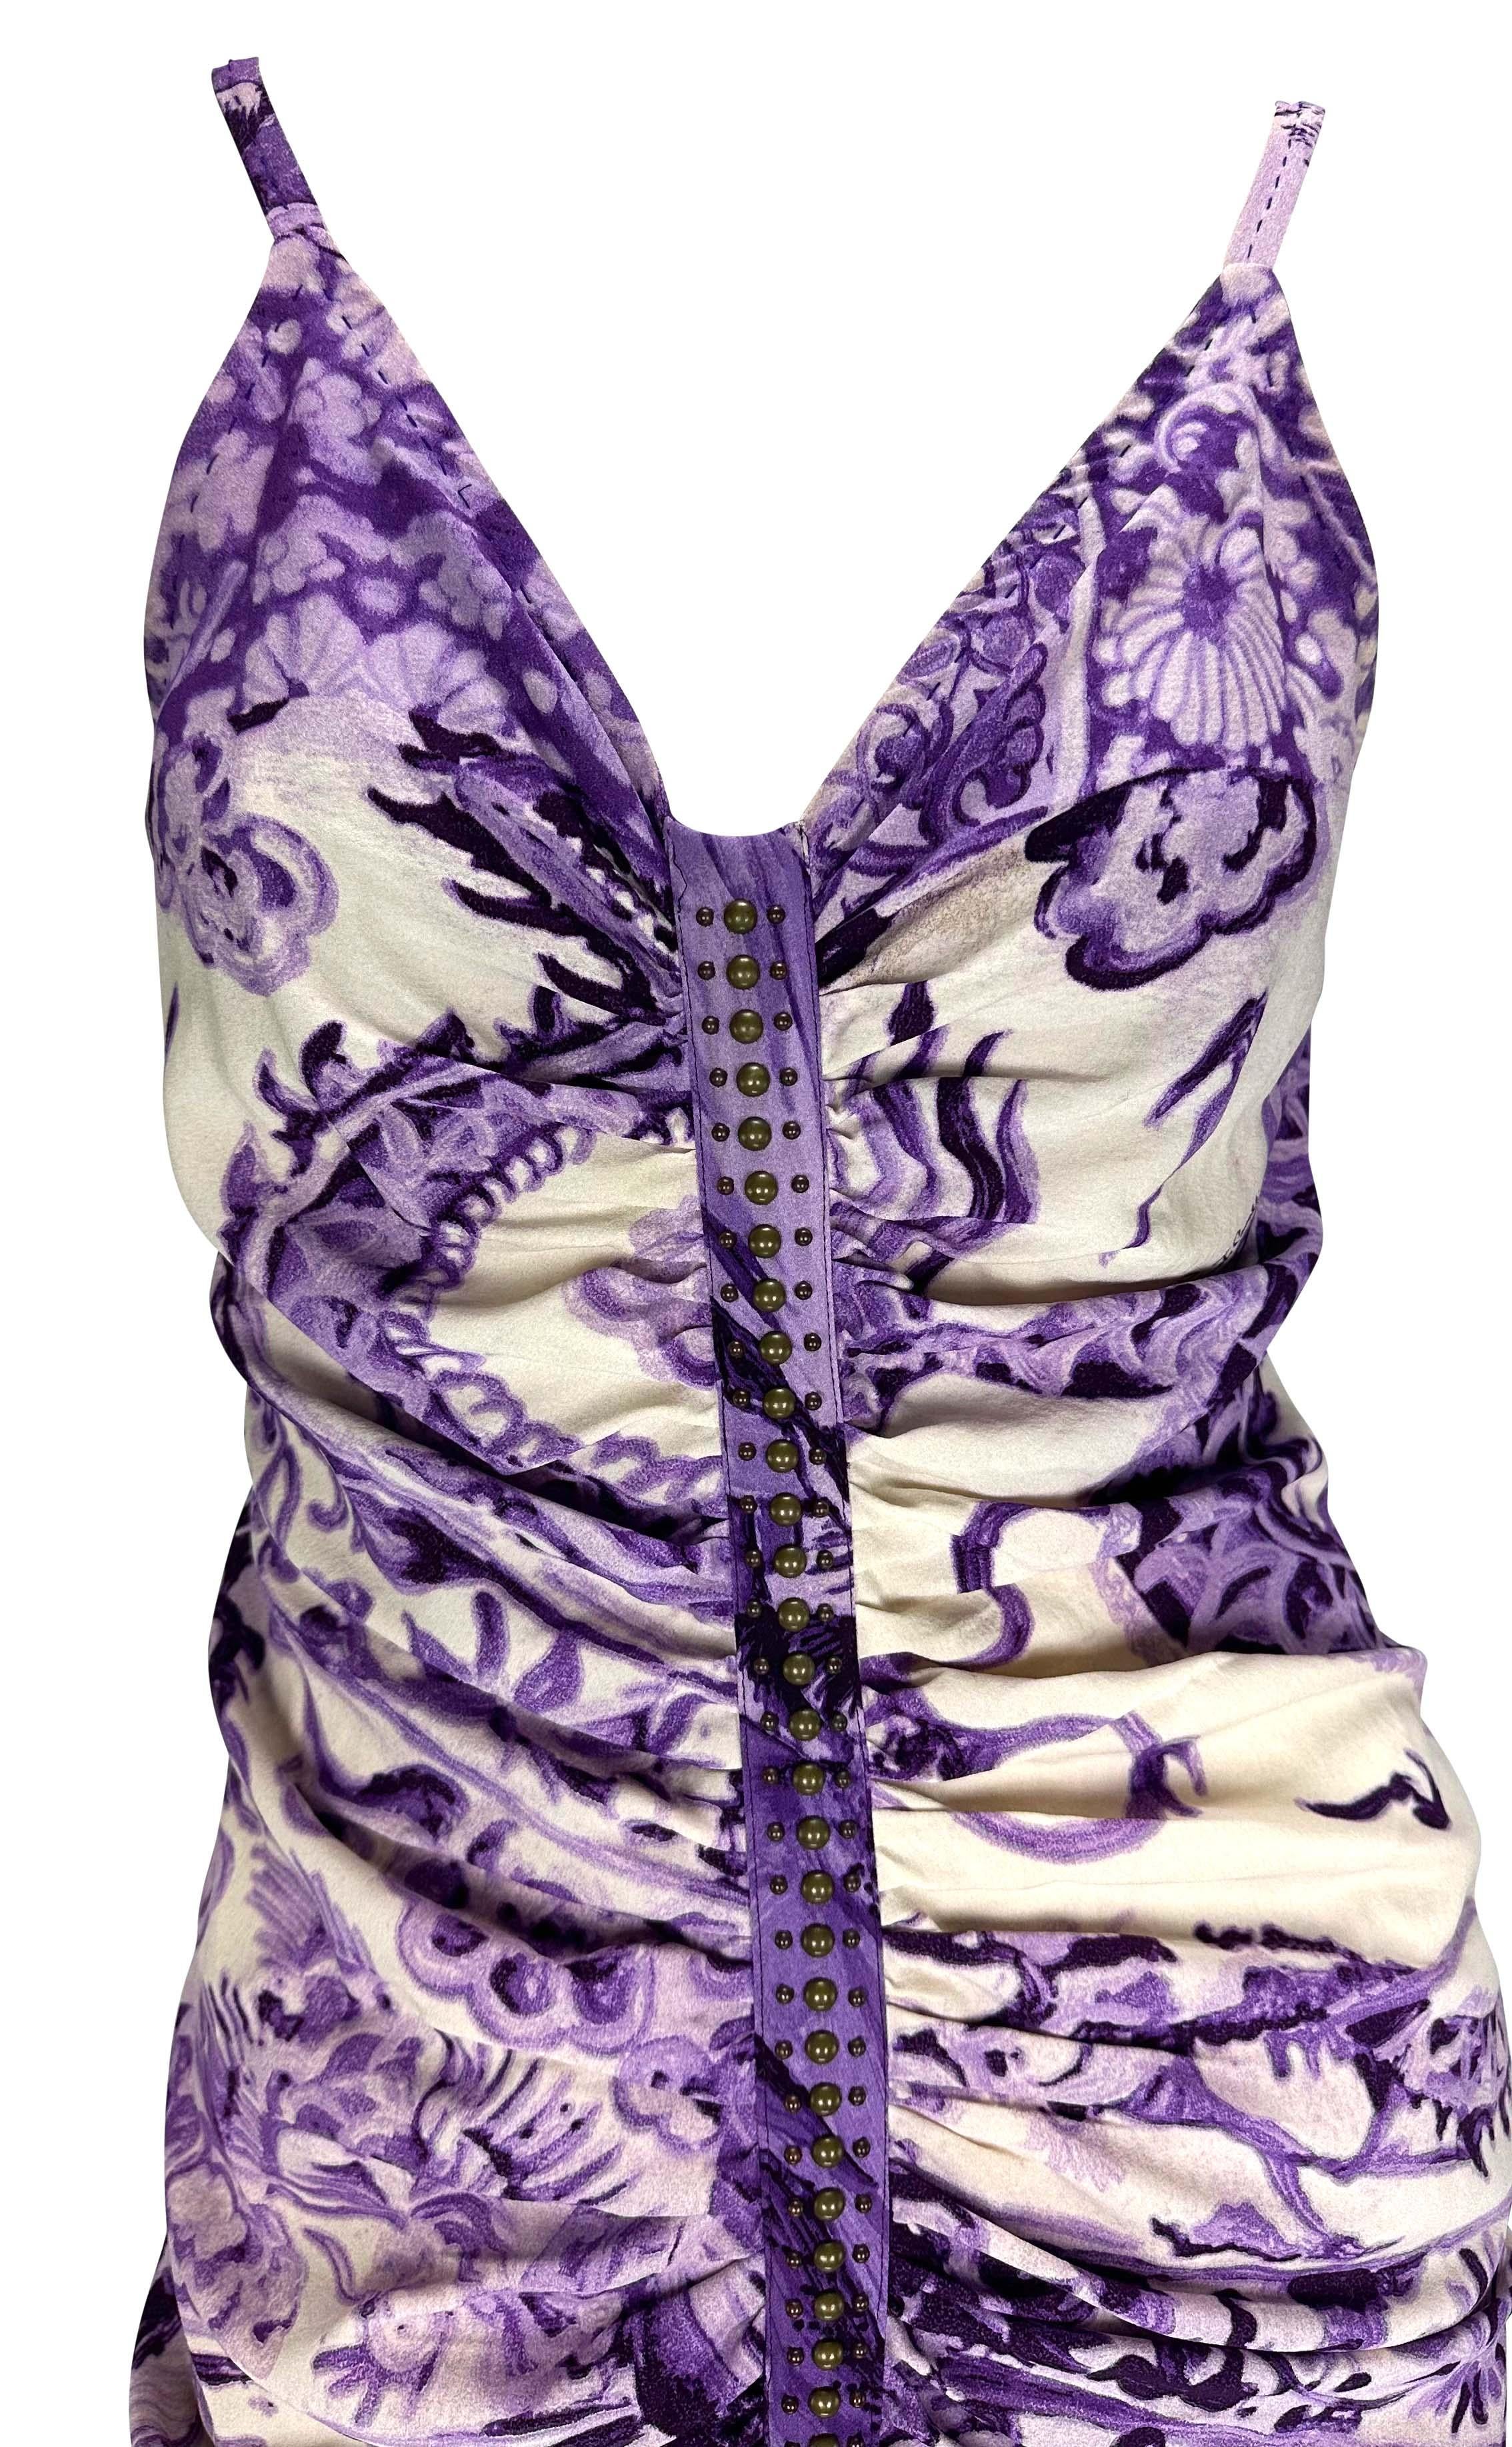 F/W 2005 Roberto Cavalli Ming Vase Print Studded Purple Flare Chinoiserie Gown In Good Condition For Sale In West Hollywood, CA